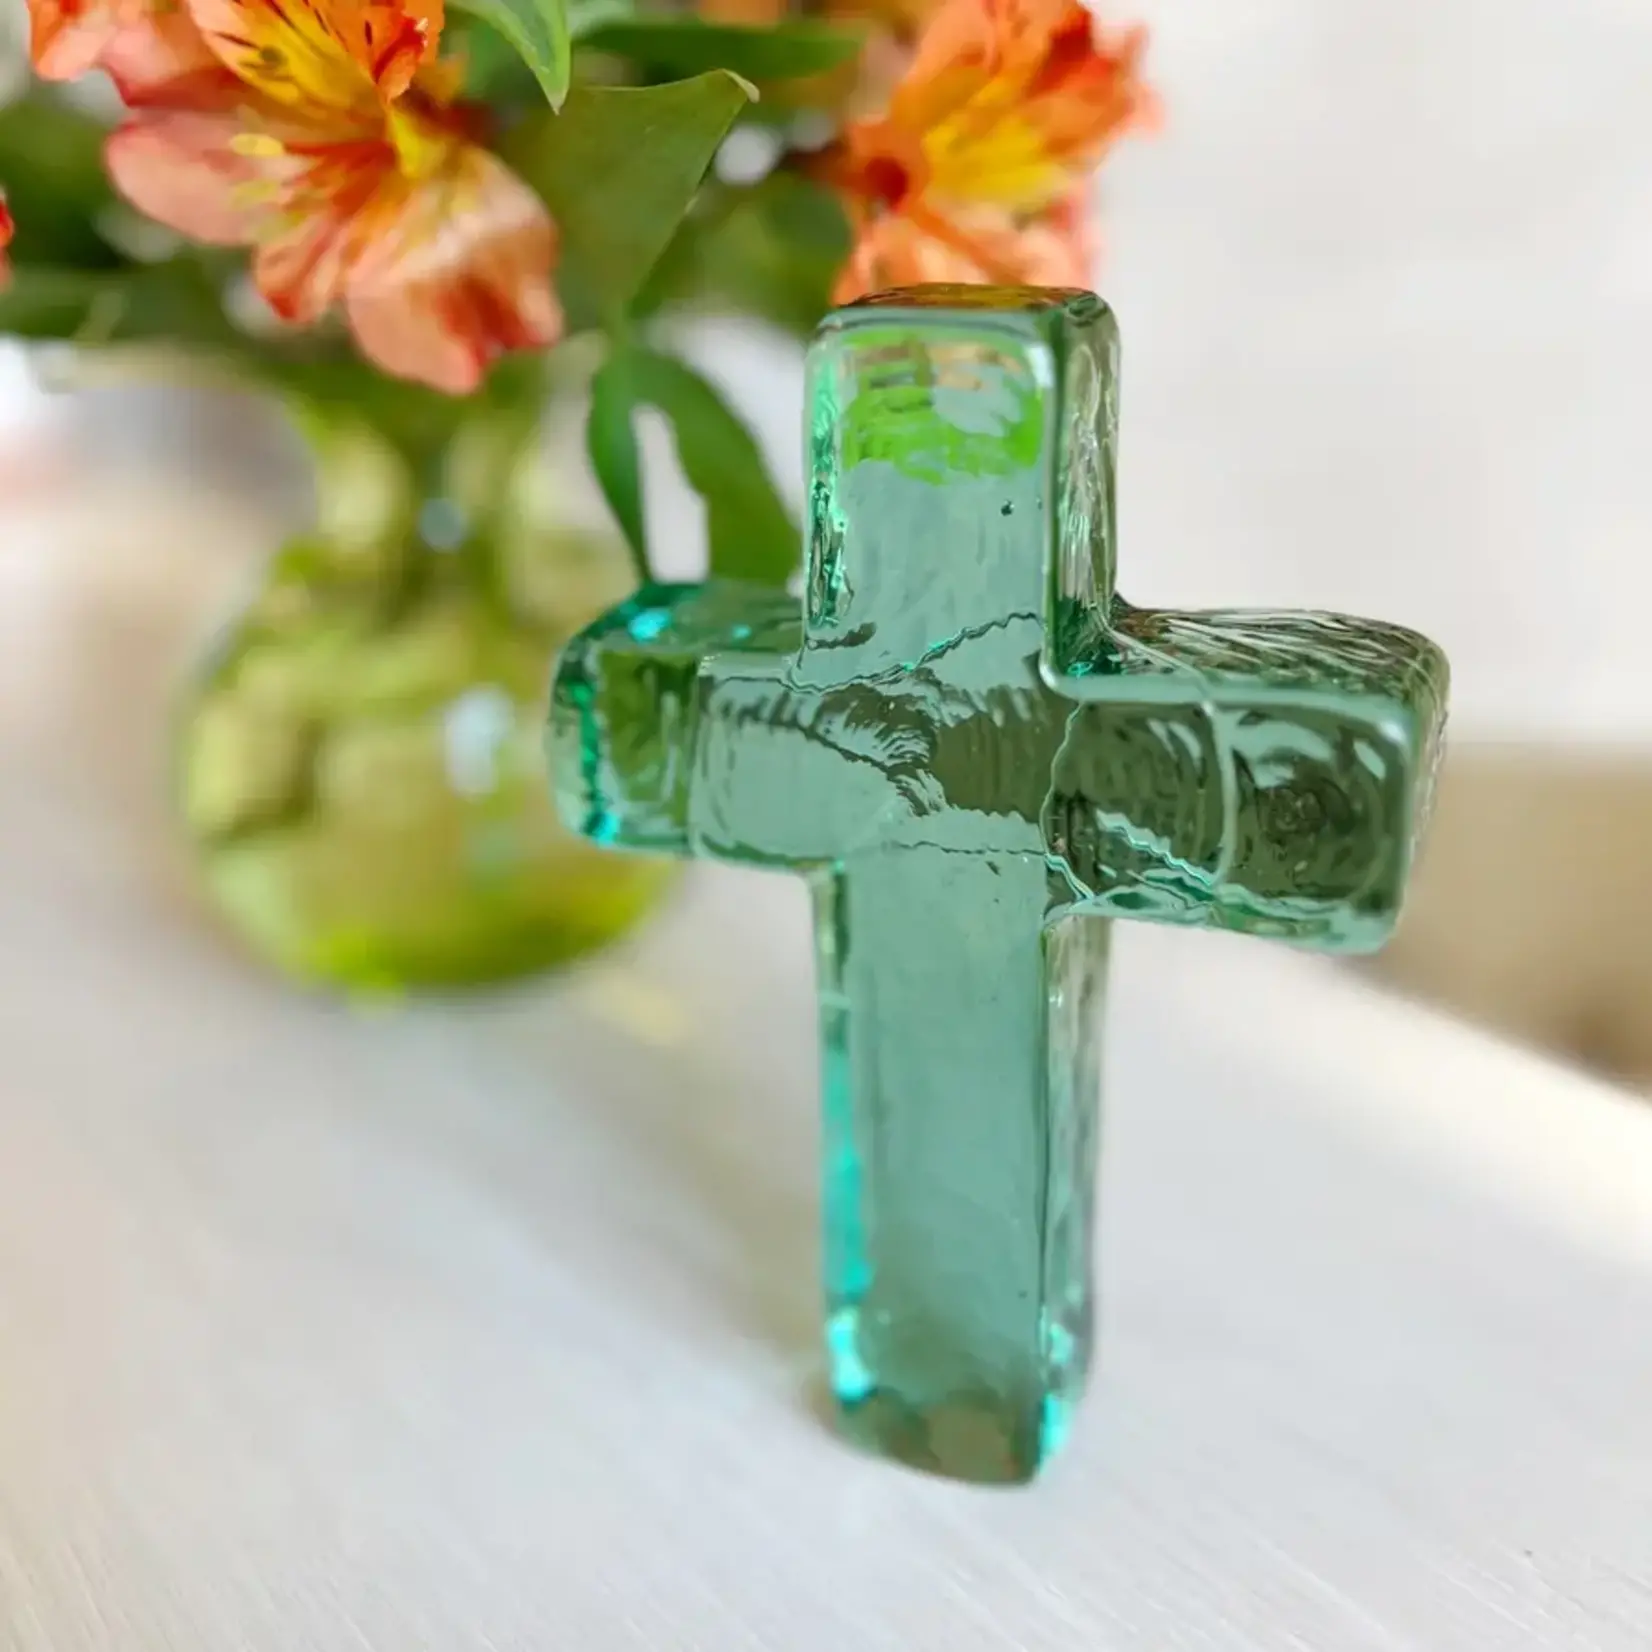 CLEERELY STATED ANGEL ON EARTH GLASS CROSS OCCASION GIFT BOX SEAGLASS GREEN